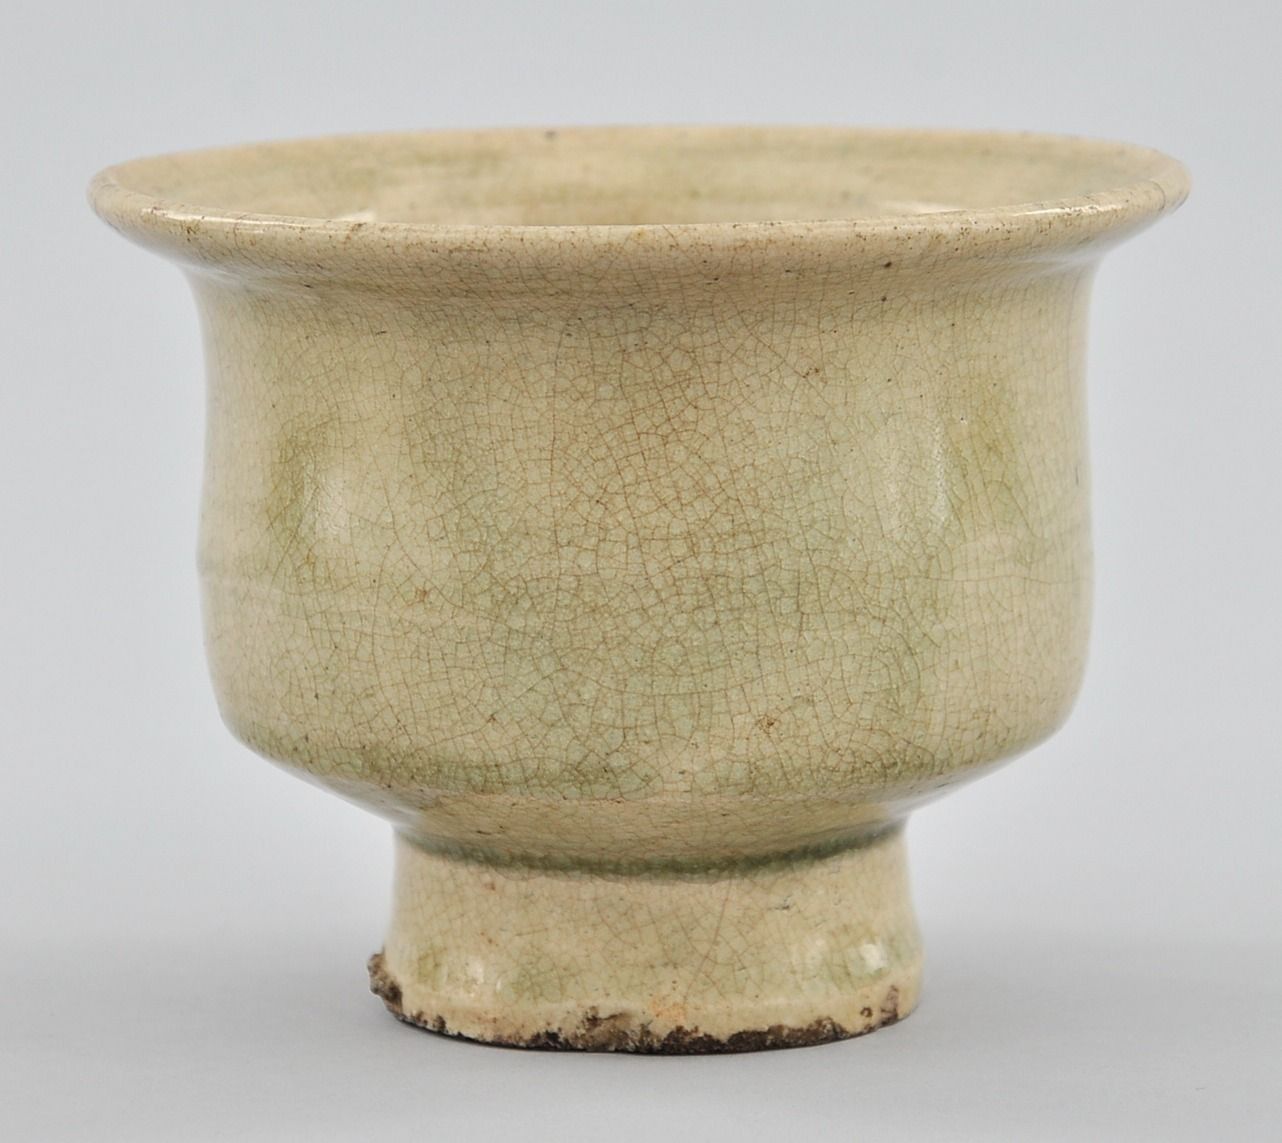 17 Awesome Korean Celadon Vase 2024 free download korean celadon vase of korean celedon footed bowl ca koryo dynasty ca 13th 14th century with regard to korean celedon footed bowl ca koryo dynasty ca 13th 14th century earthenware with light